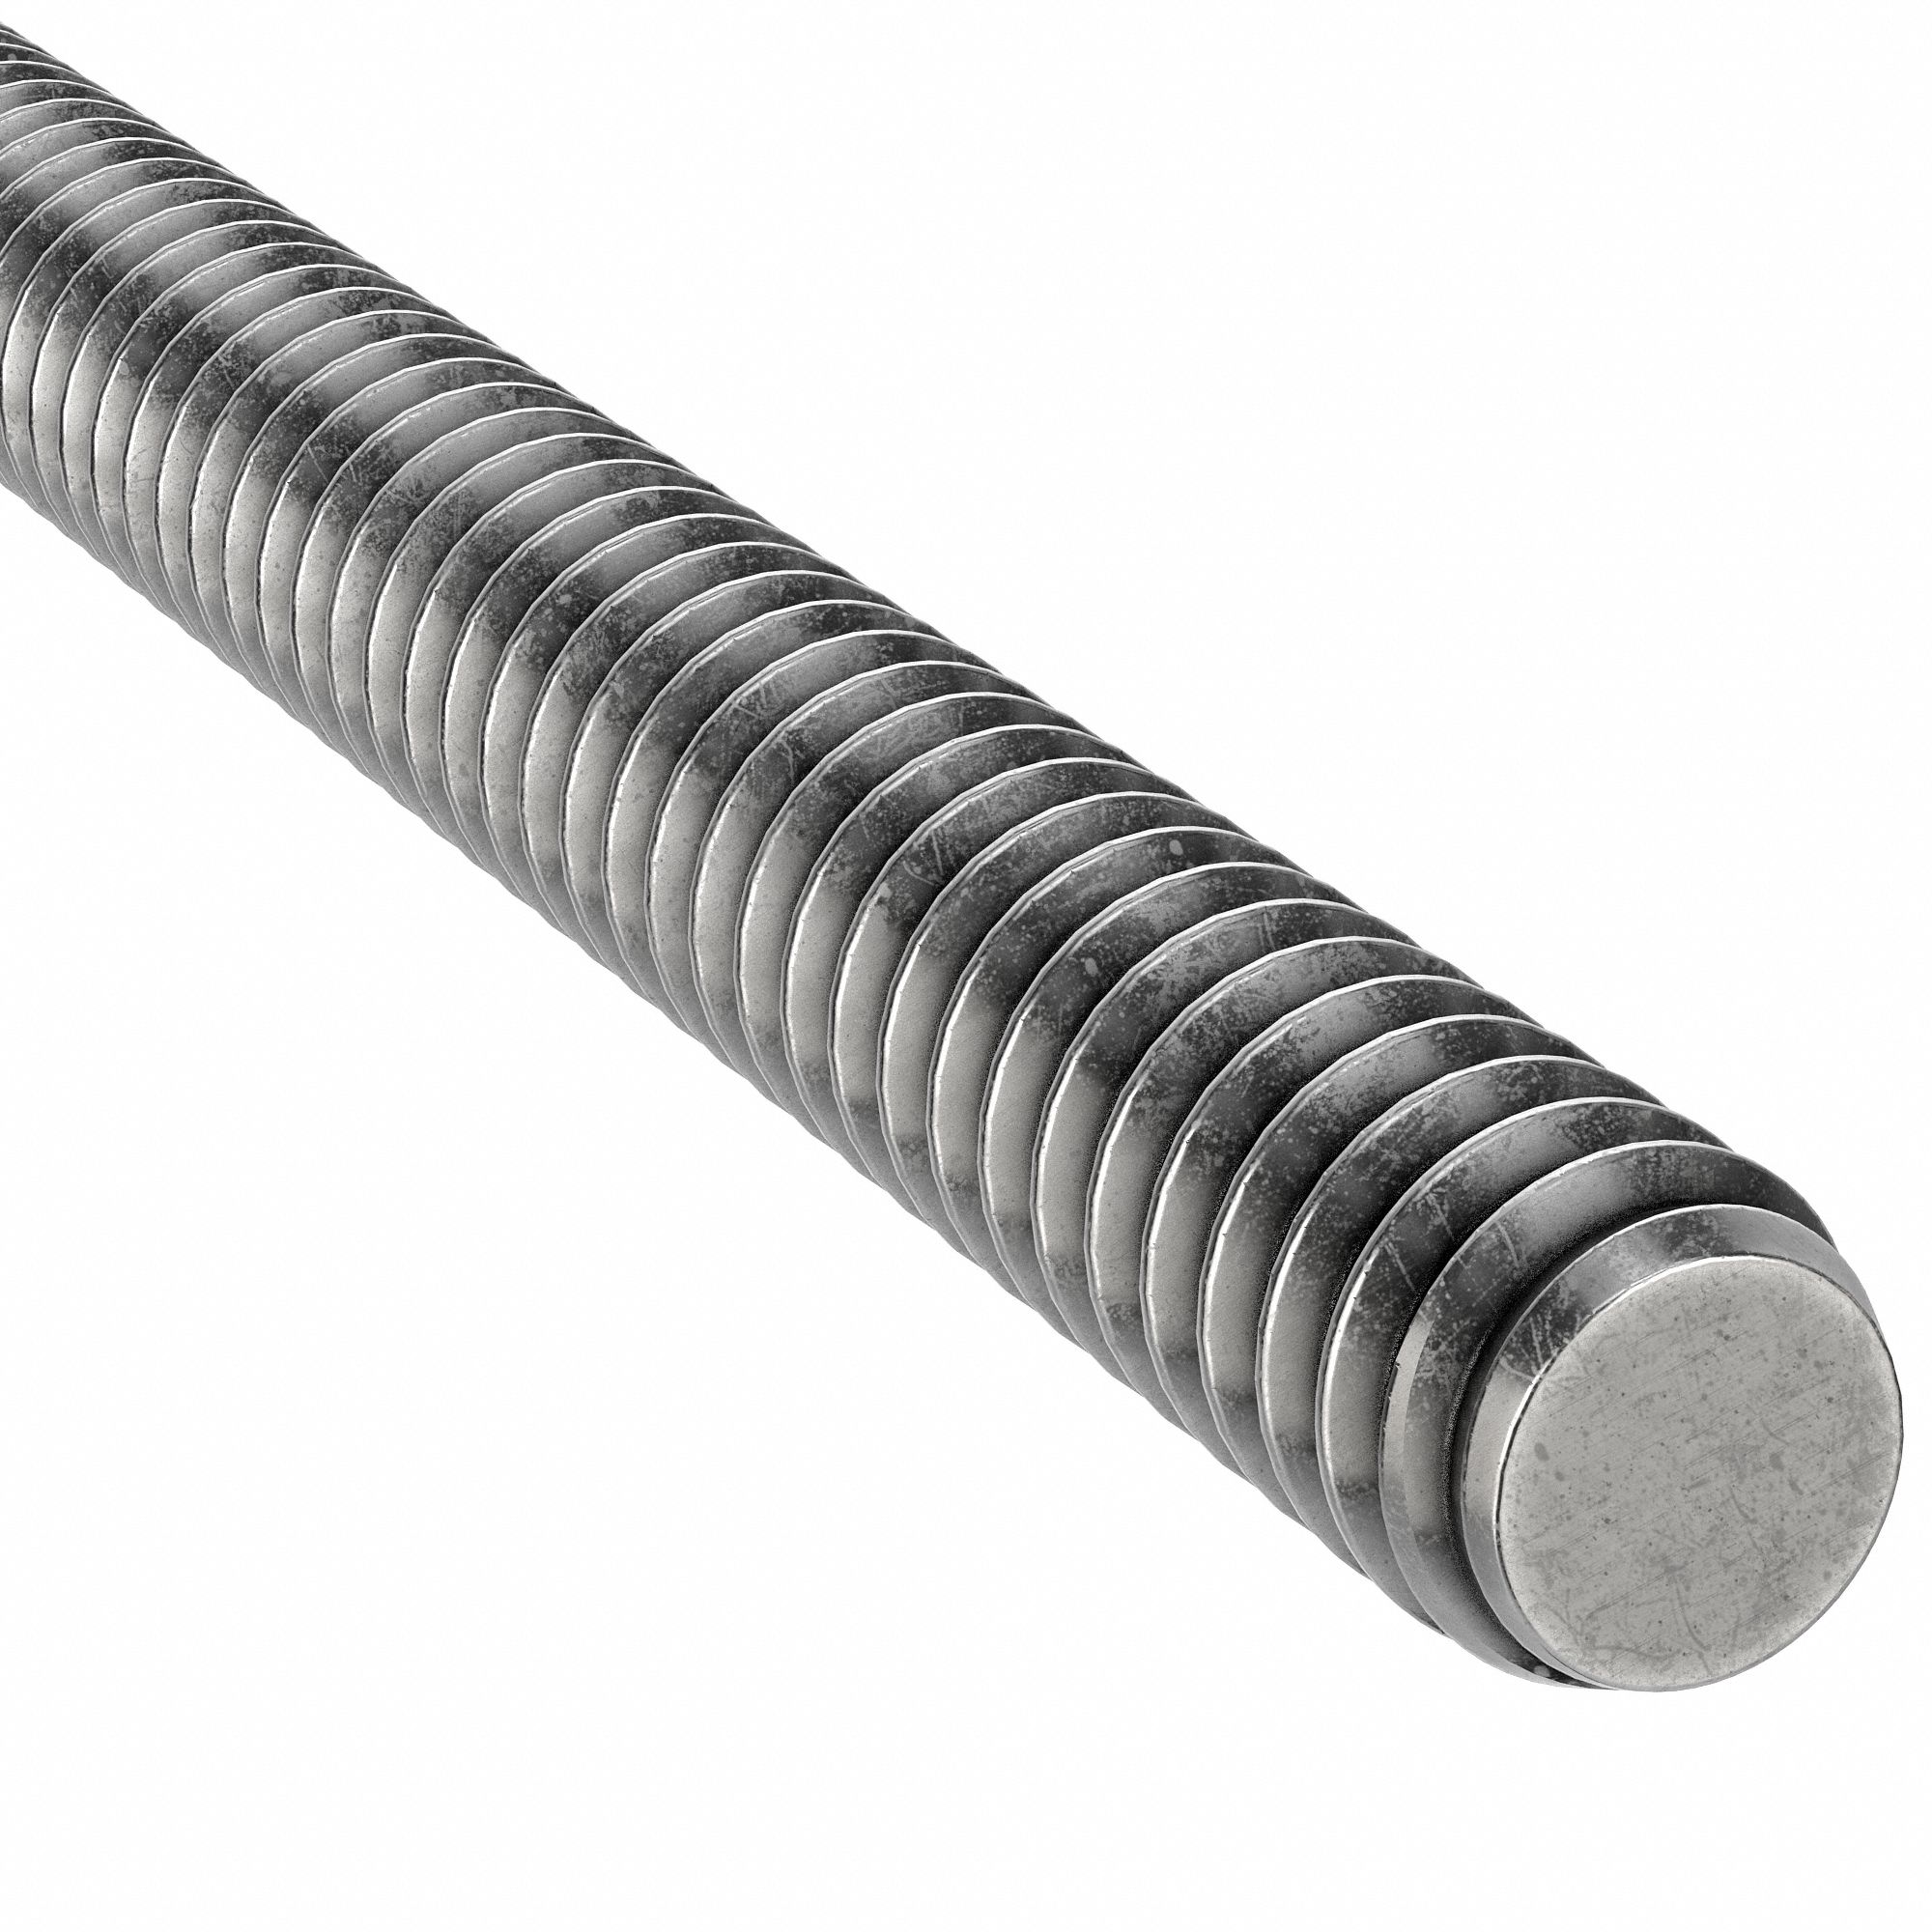 2BA Stainless Steel Threaded Bar x 12 Inches Long All Thread Studding  1 Item 